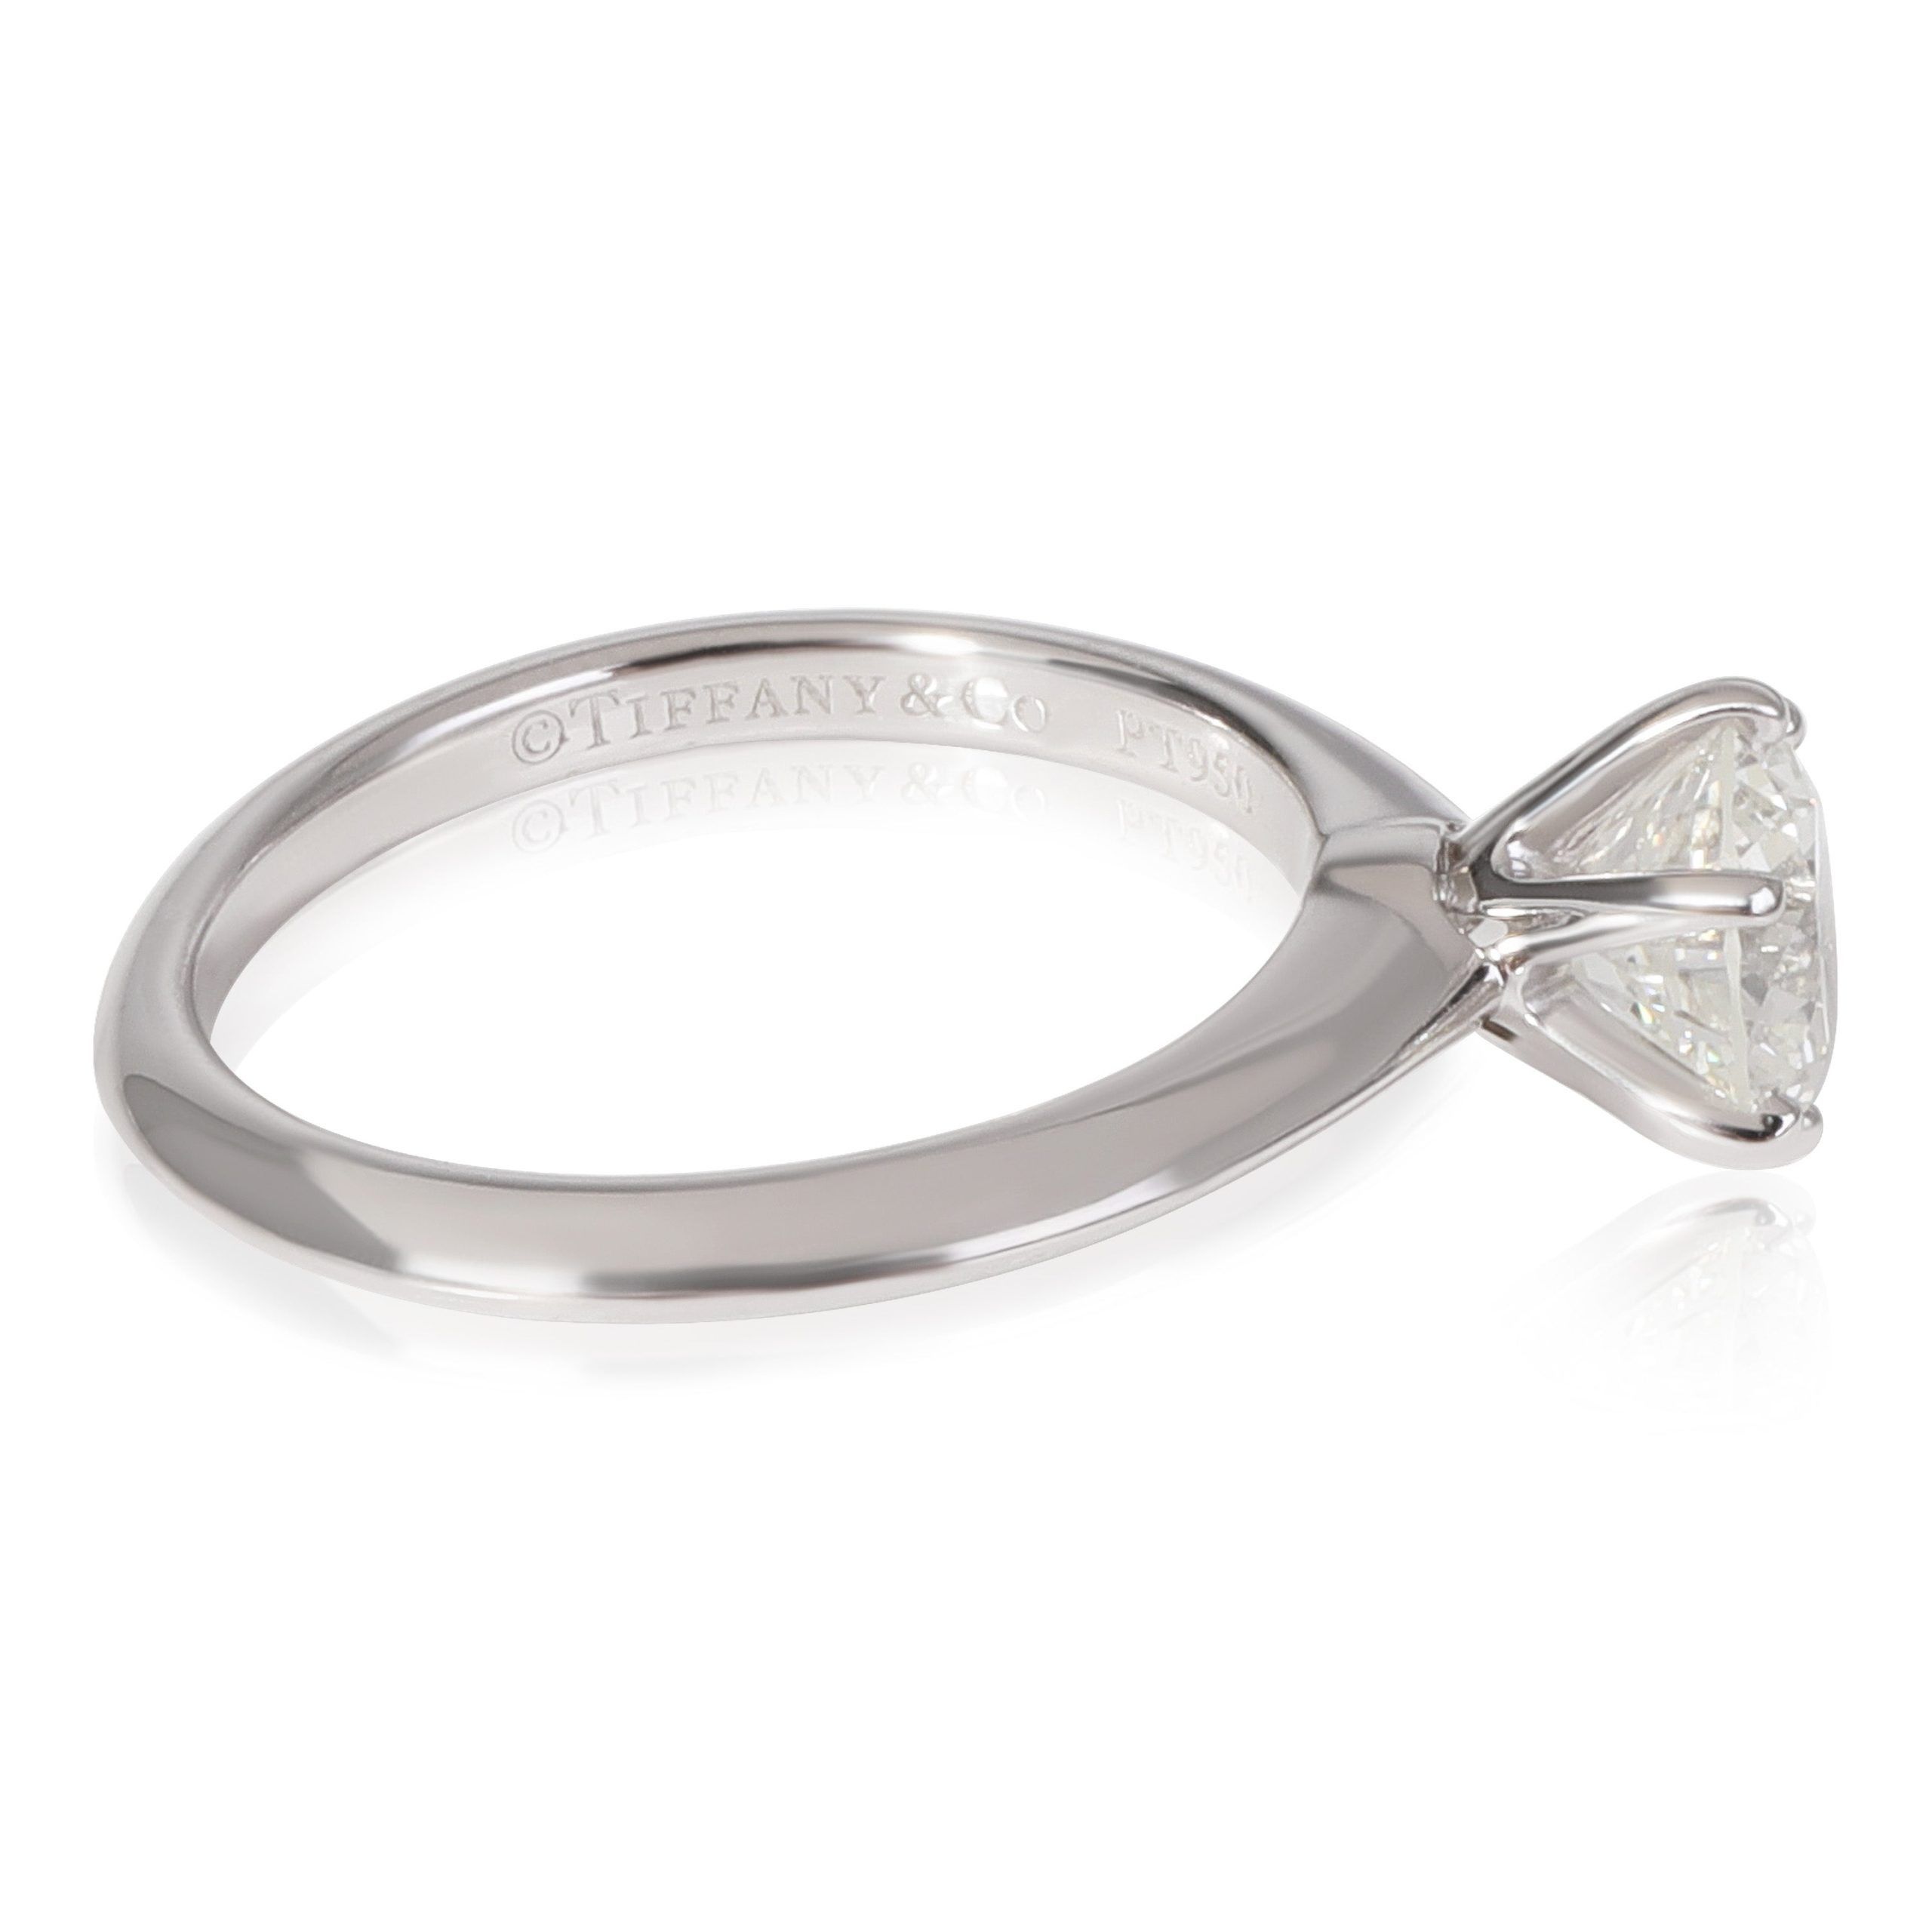 Tiffany & Co. Tiffany & Co. Diamond Engagement Ring in Platinum (0.94 ct I/VVS1) Size ONE SIZE - 2 Preview